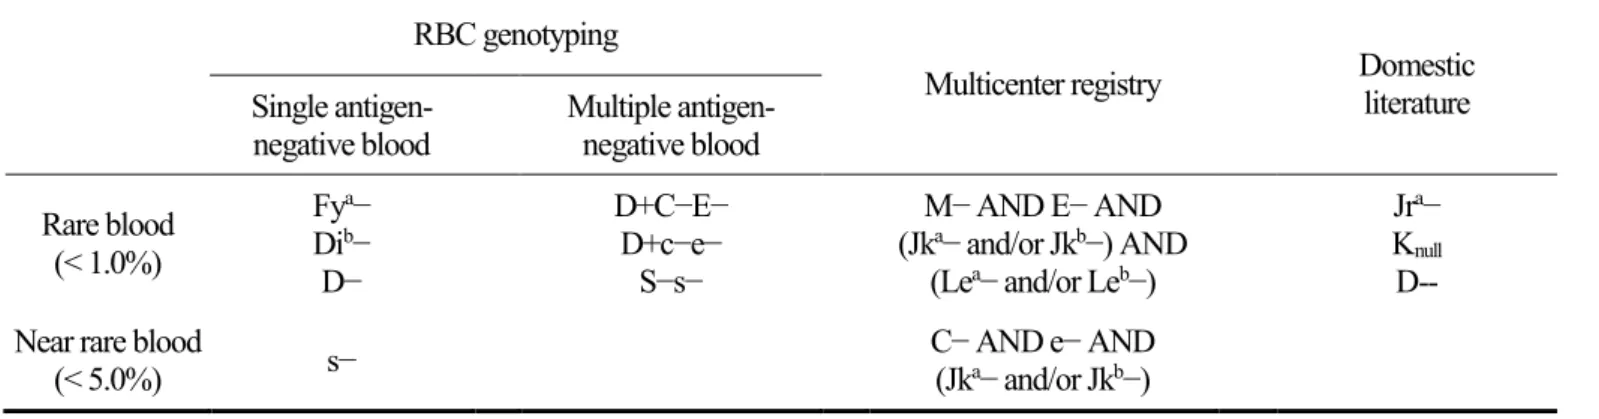 Table 10. Proposal of rare blood units based on various blood group genotypes and unexpected antibodies in Korean population  RBC genotyping 